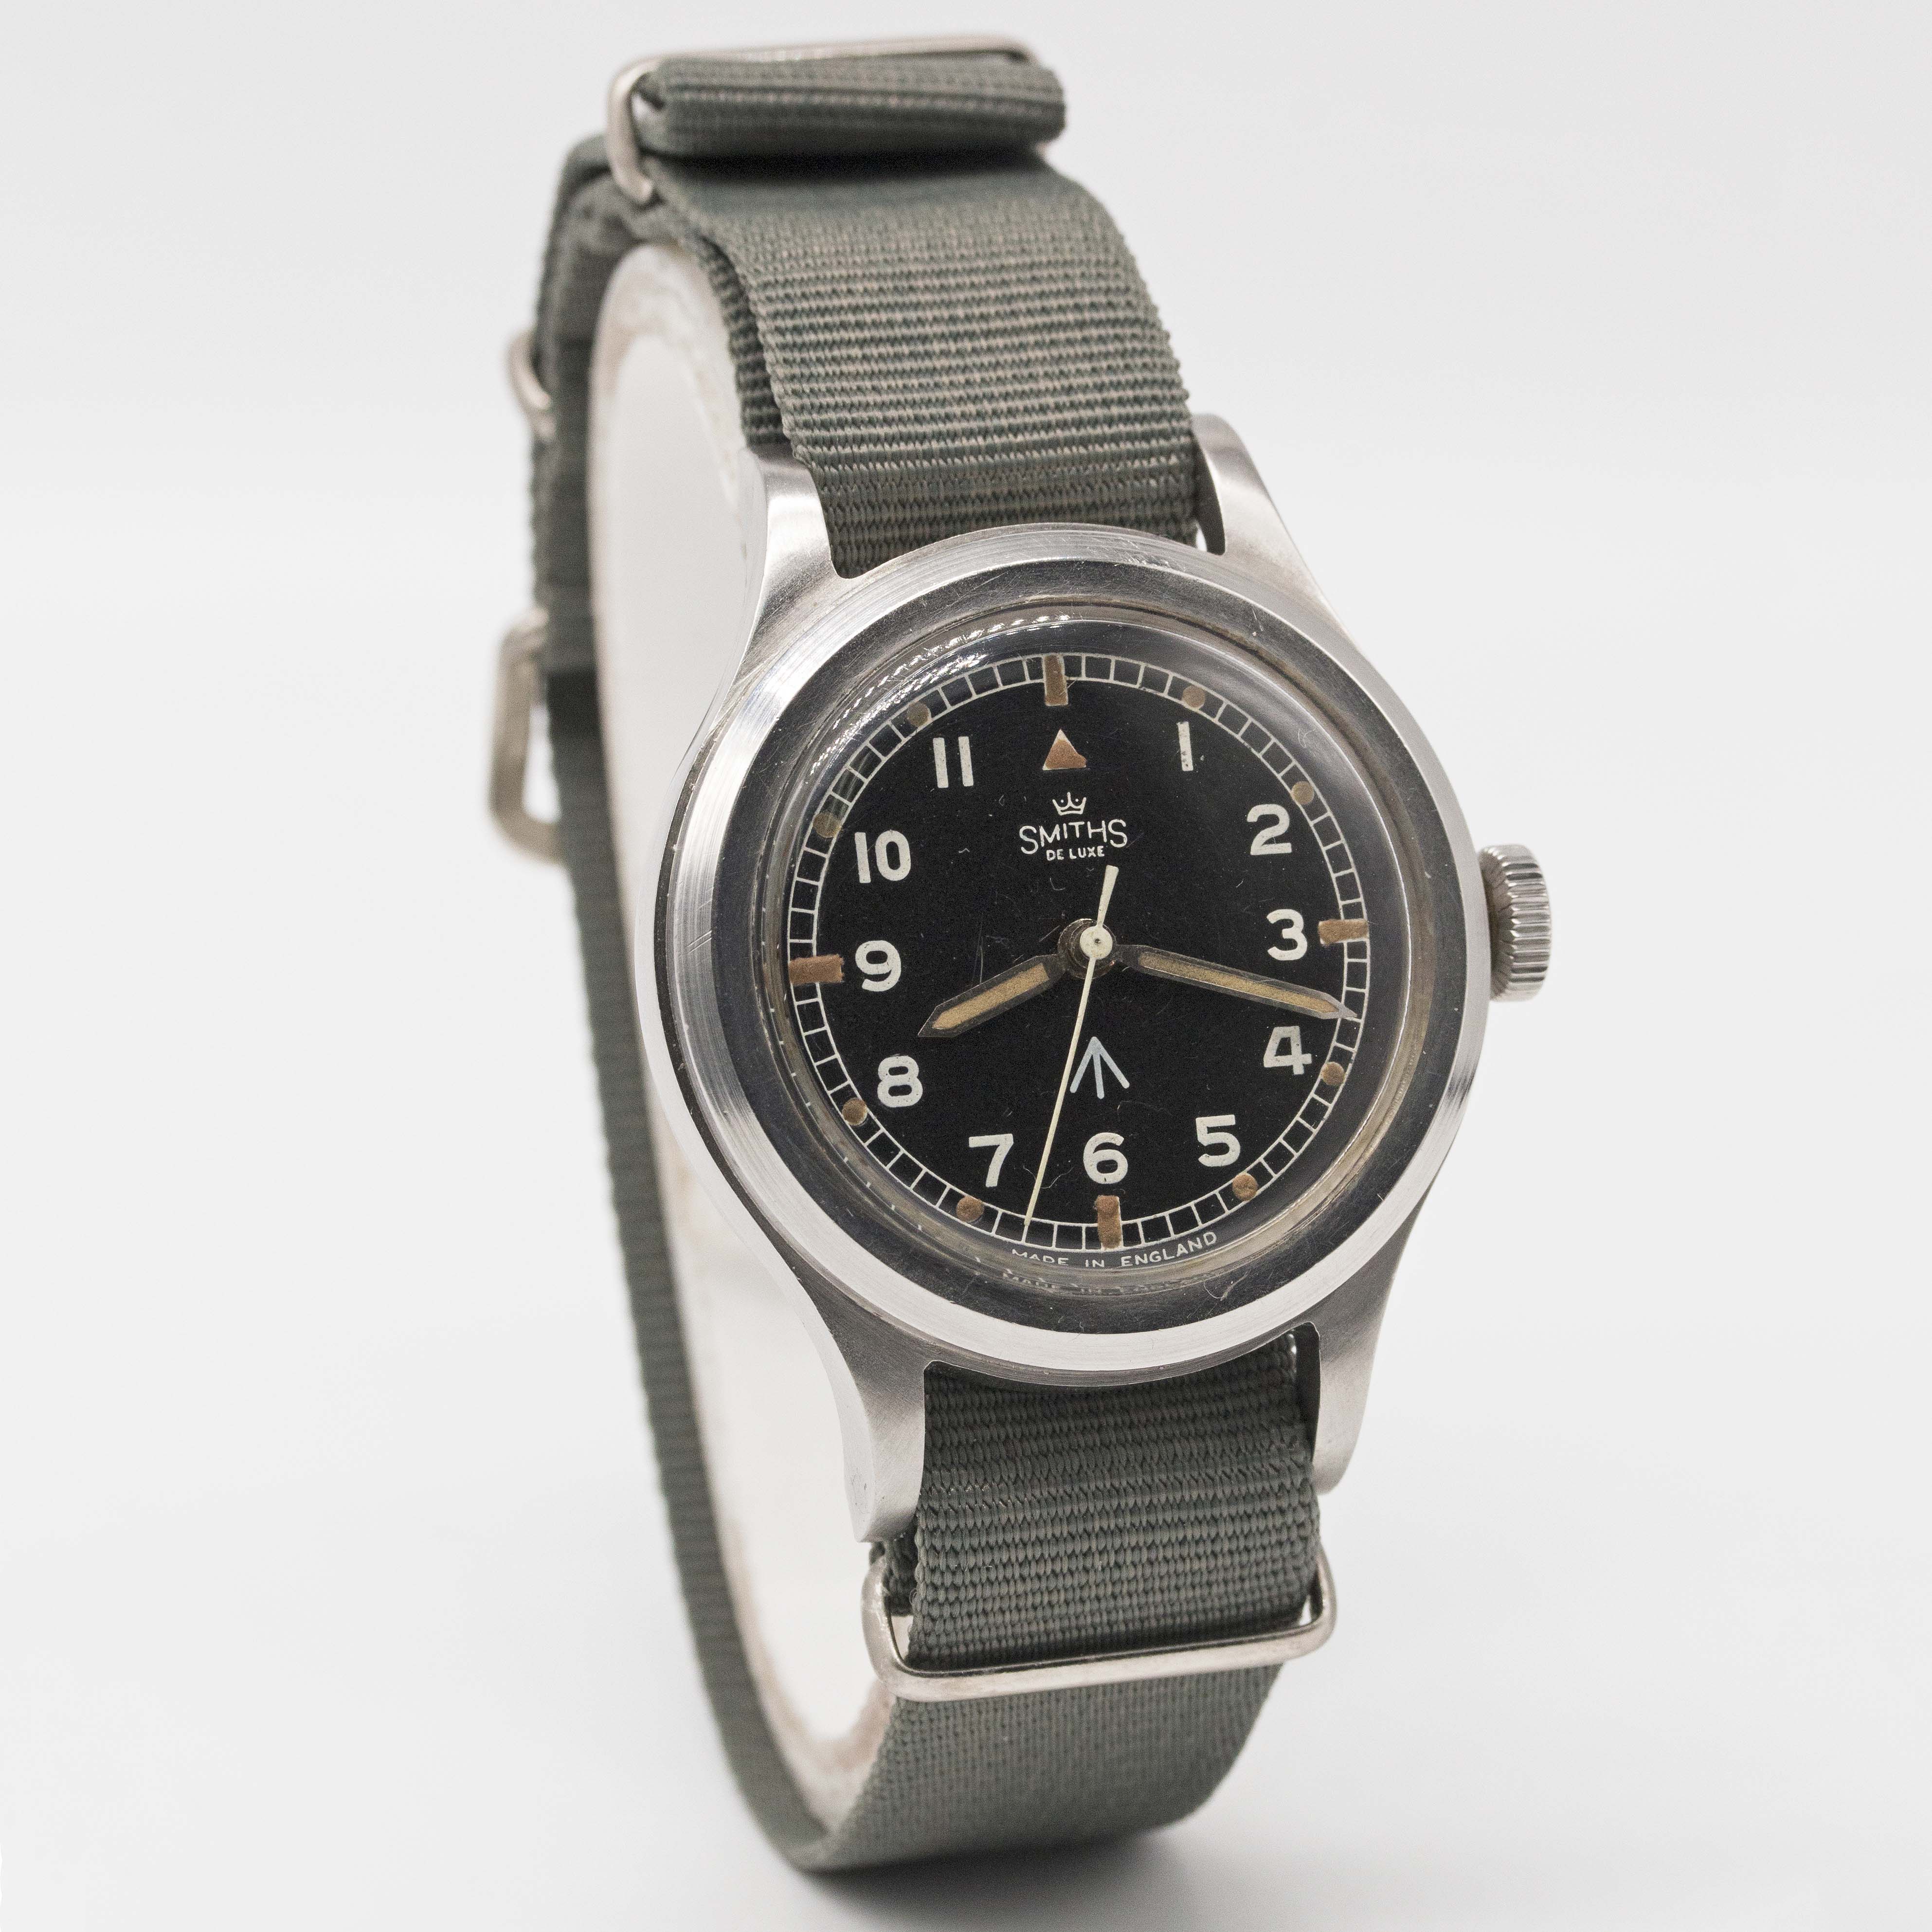 A VERY RARE GENTLEMAN'S STAINLESS STEEL AUSTRALIAN MILITARY SMITHS DE LUXE WRIST WATCH DATED 1961, - Image 6 of 11